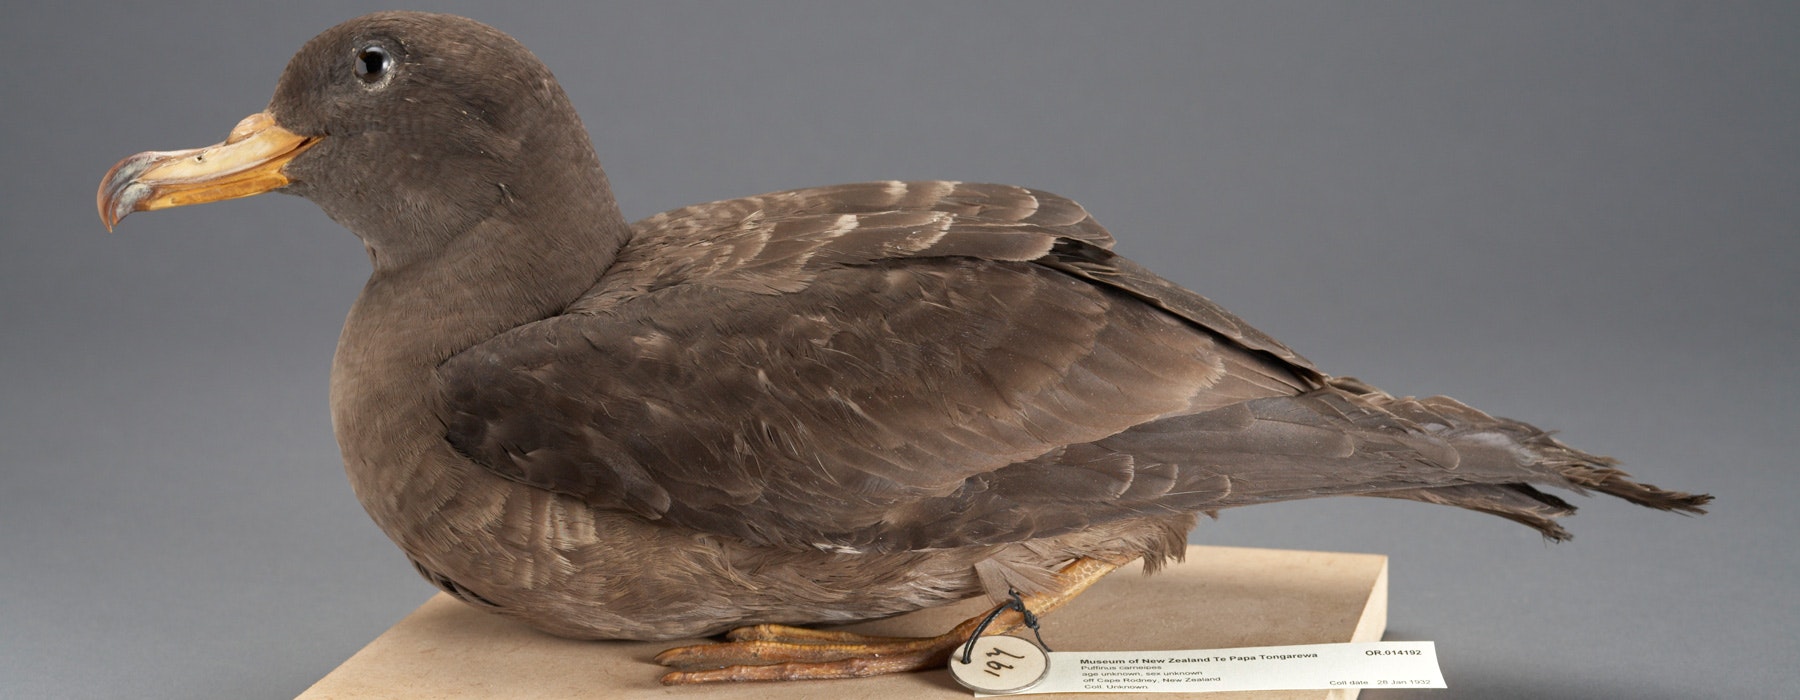 Flesh-footed Shearwater, Puffinus carneipes, collected 28 Jan 1932, off Cape Rodney, New Zealand. Purchased 1939. CC BY-NC-ND licence. Te Papa (OR.014192)